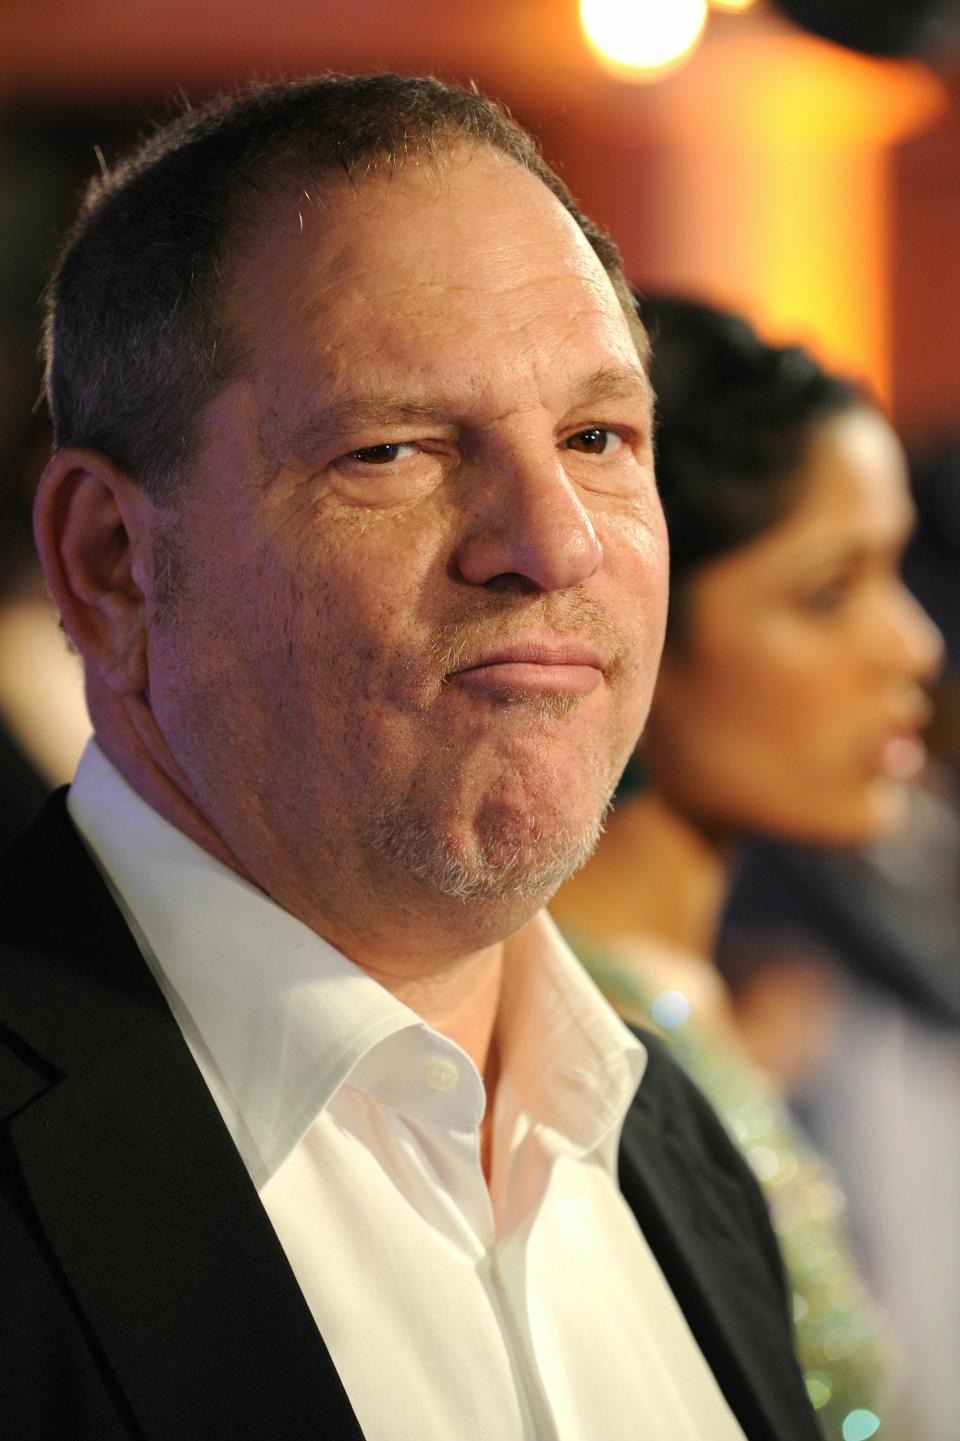 Harvey Weinstein, once a Hollywood power player, is making headlines after his 2020 rape conviction in New York was thrown out after it was found a judge made improper rulings.